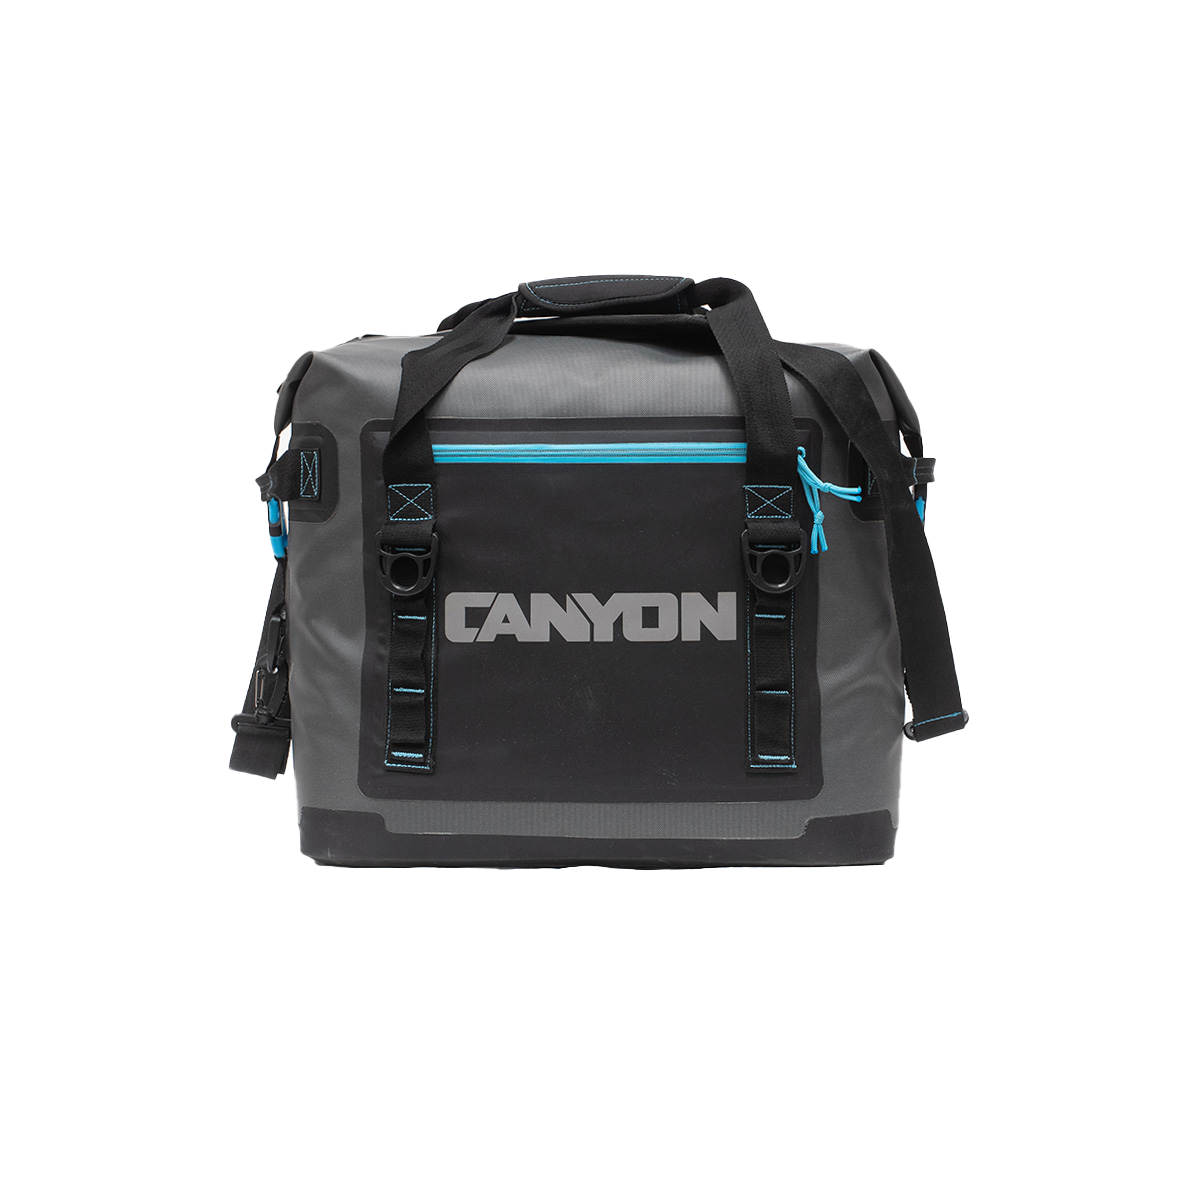 Featuring the Nomad Series Soft Cooler cooler manufactured by Canyon shown here from one angle.